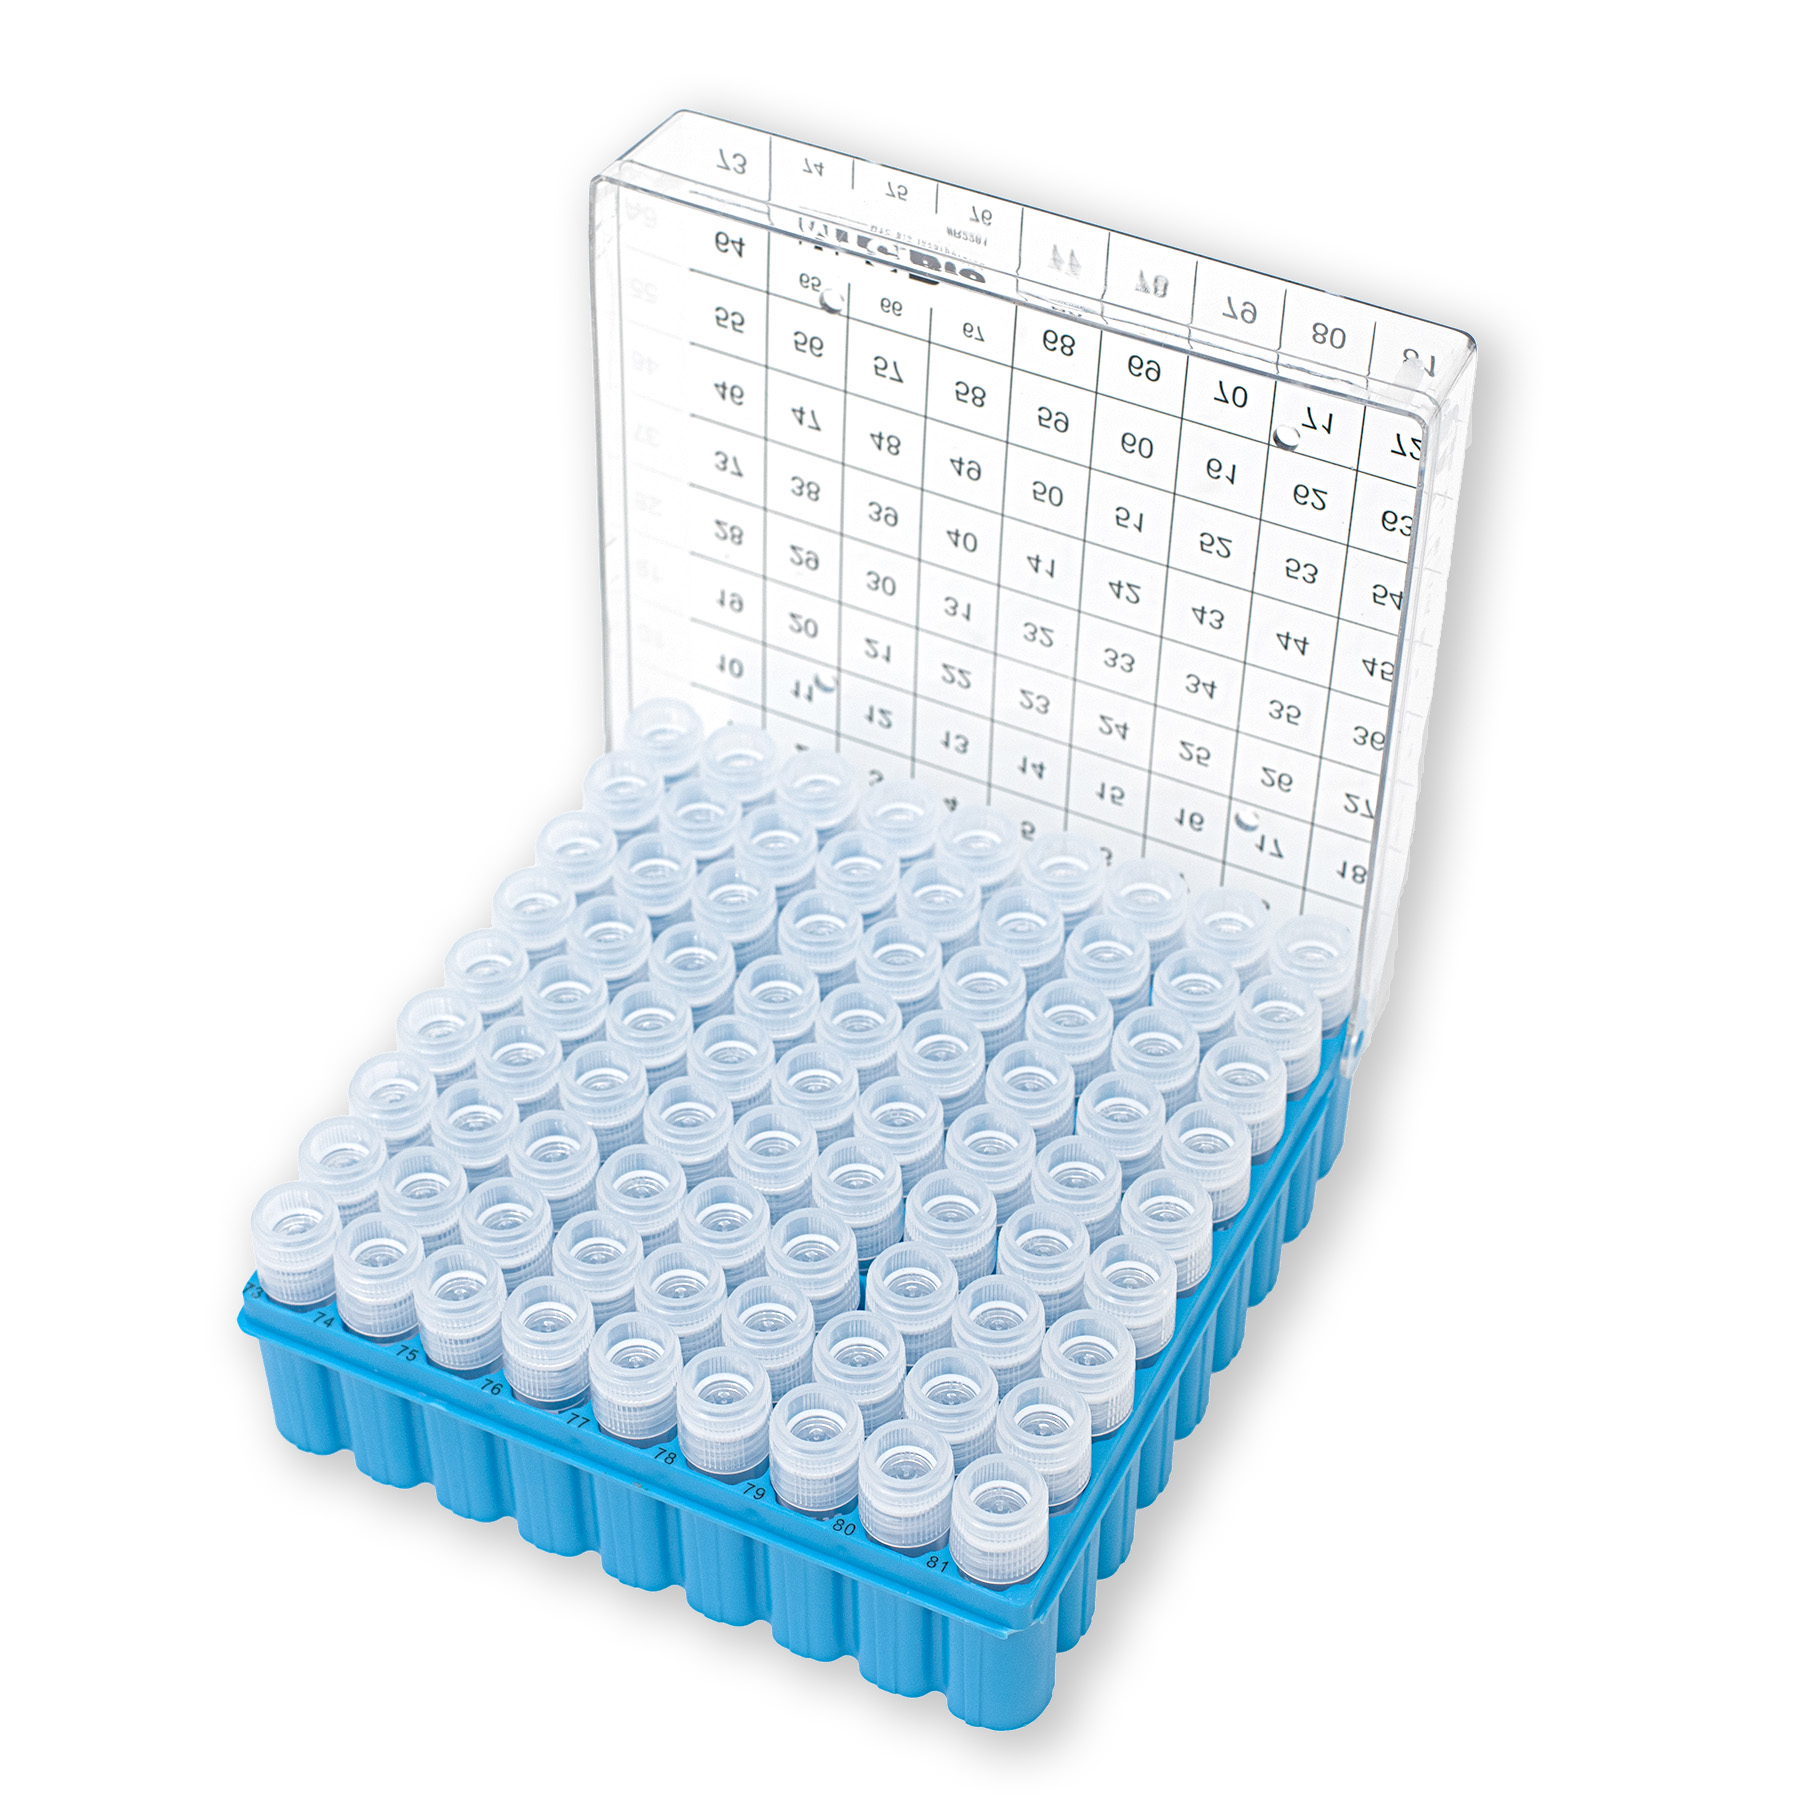 Shop 100 Well Cryovial Storage Boxes